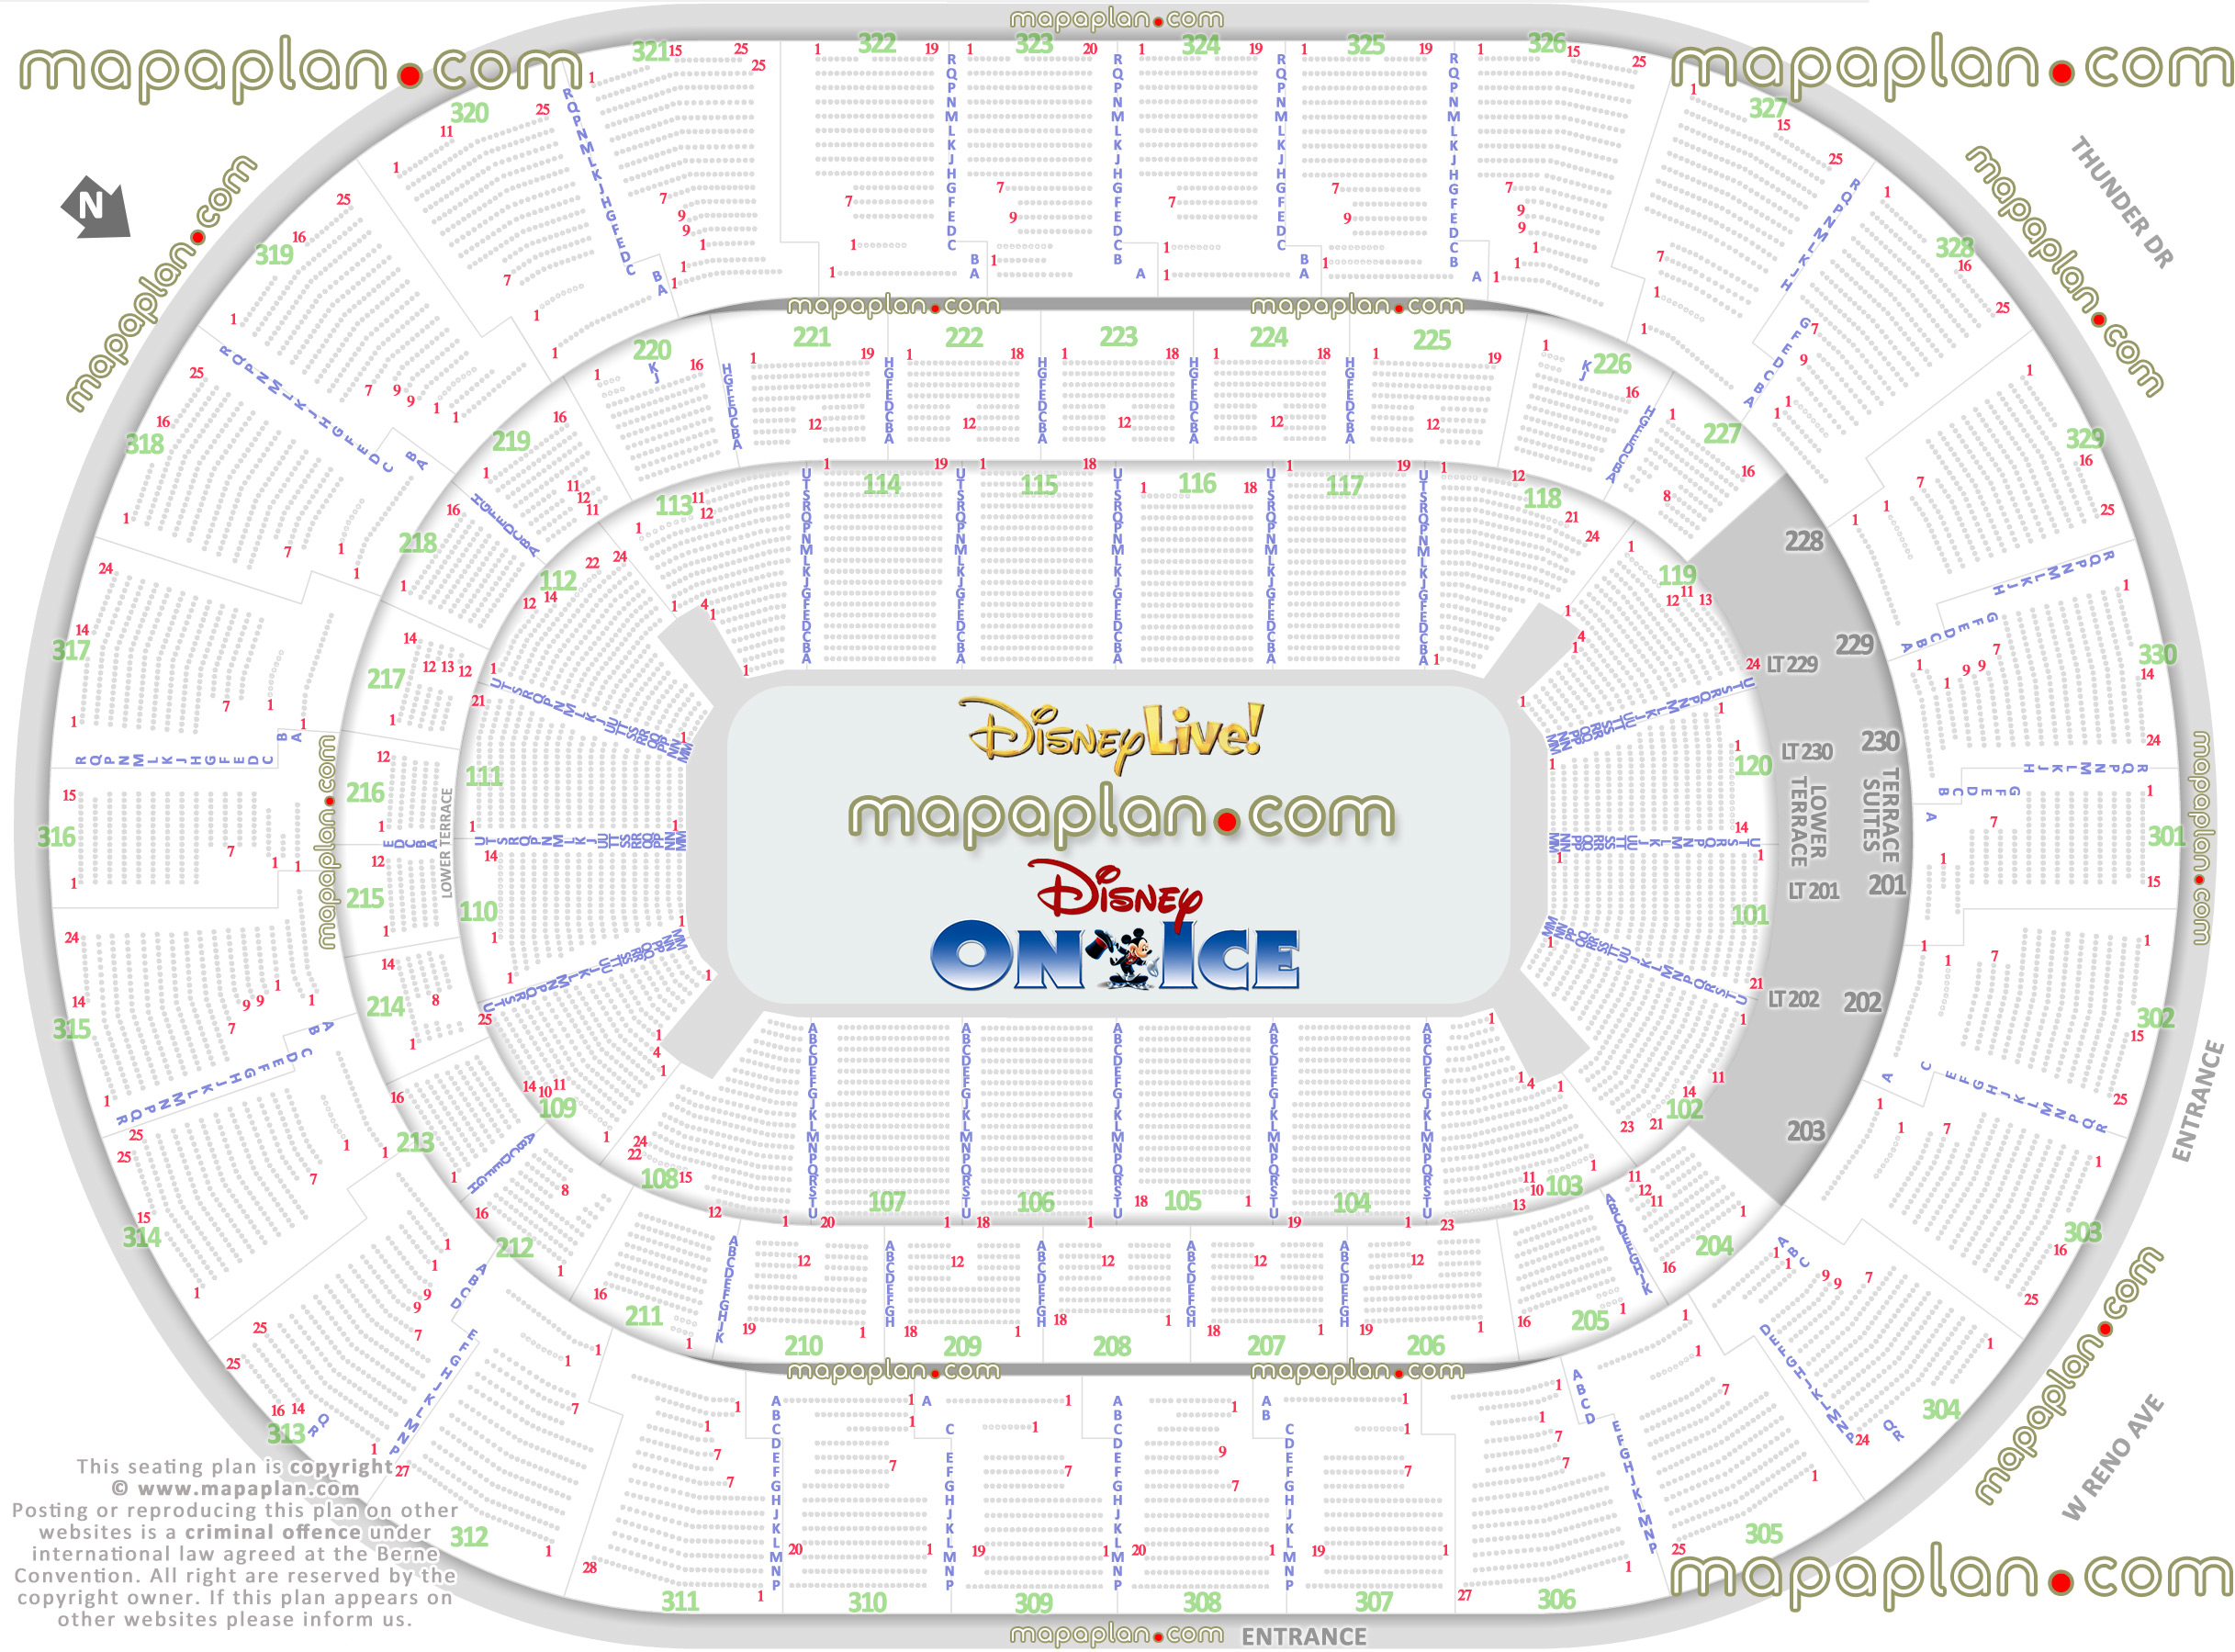 disney ice disney live oklahoma city ok usa best seat finder 3d interactive tool precise detailed aisle seat row numbering location data plan ice rink event floor level map lower bowl concourse club upper balcony seating suites terrace lounge boxes rows a b c d e f g h j k l m n p q r s t u Oklahoma City Paycom Center Arena seating chart